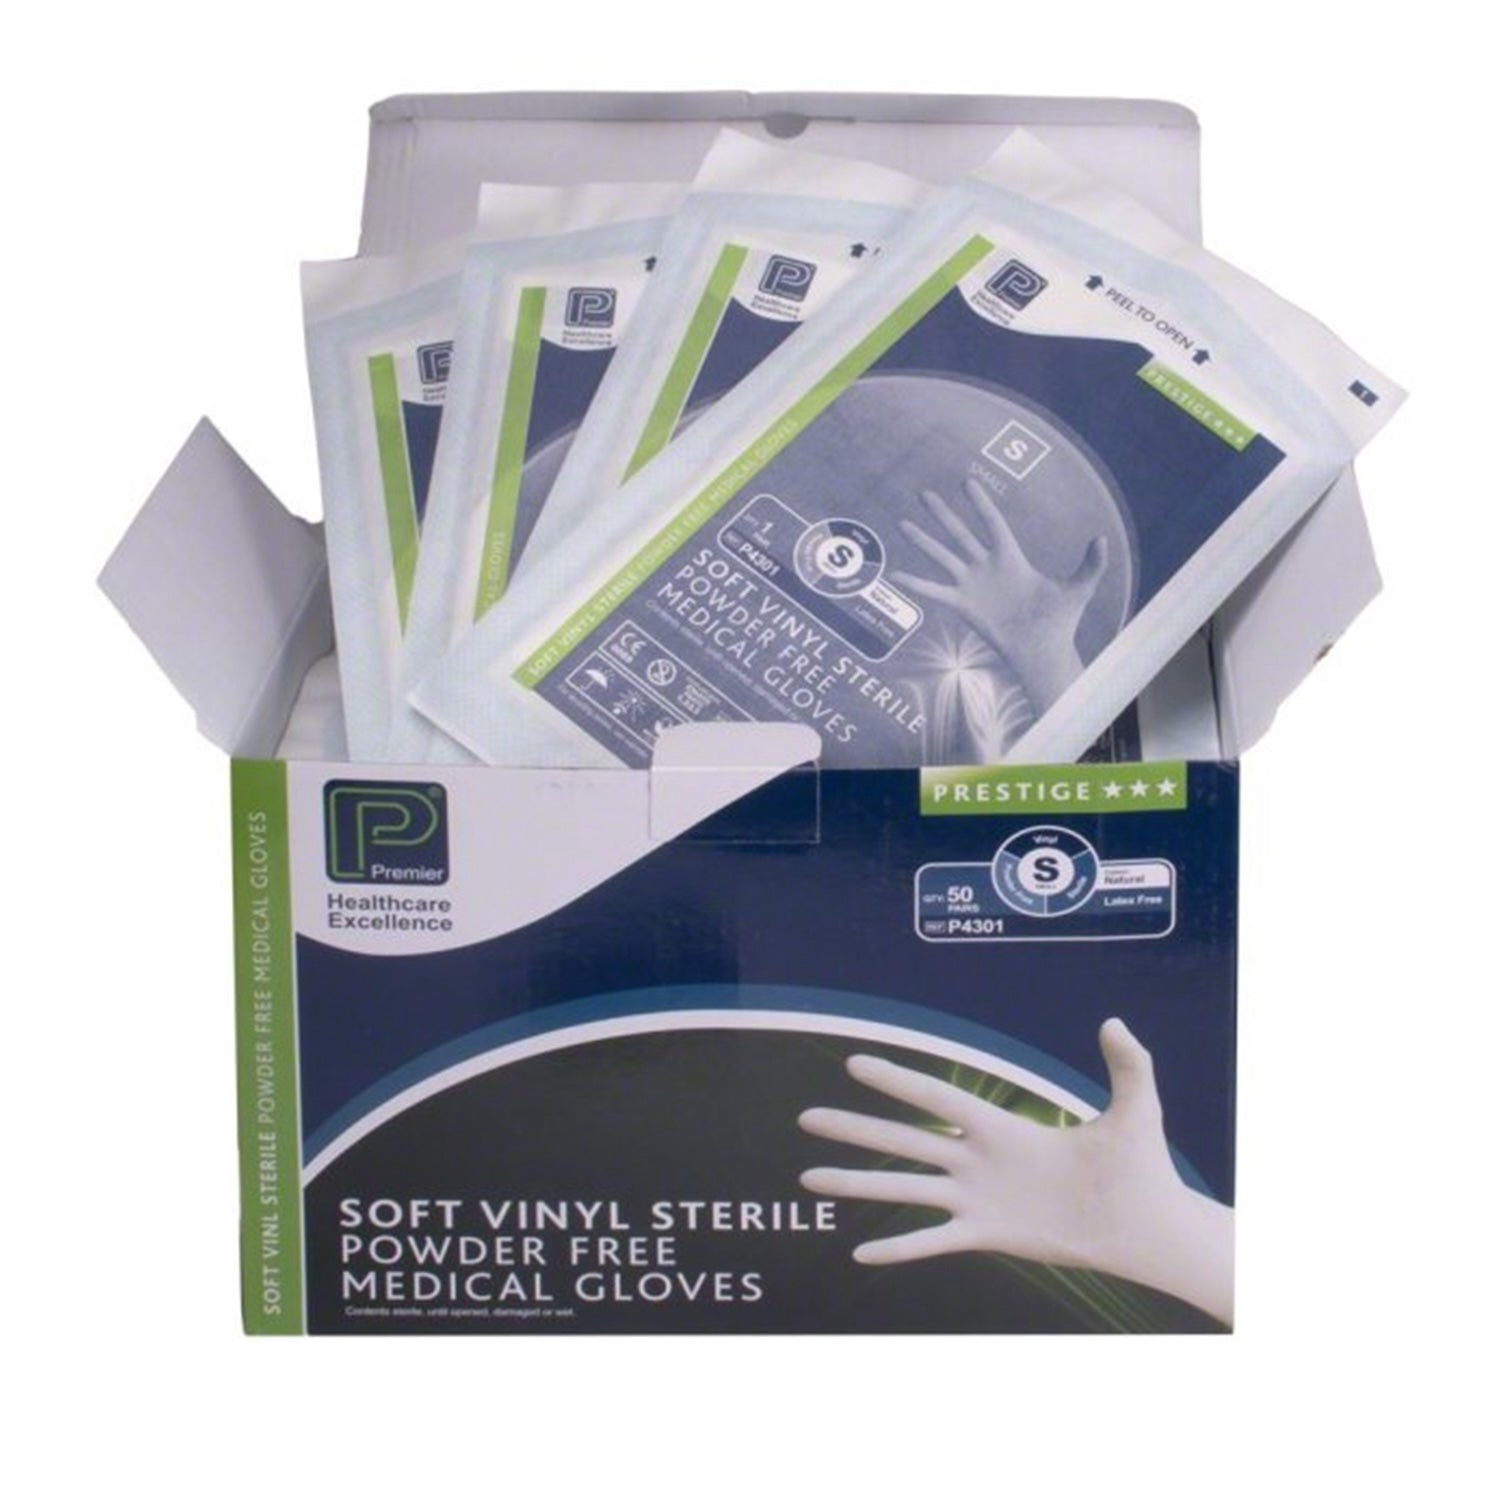 Premier Soft Vinyl Powder Free Gloves | Sterile | Latex Free | Small | Pack of 50 Pairs (1)